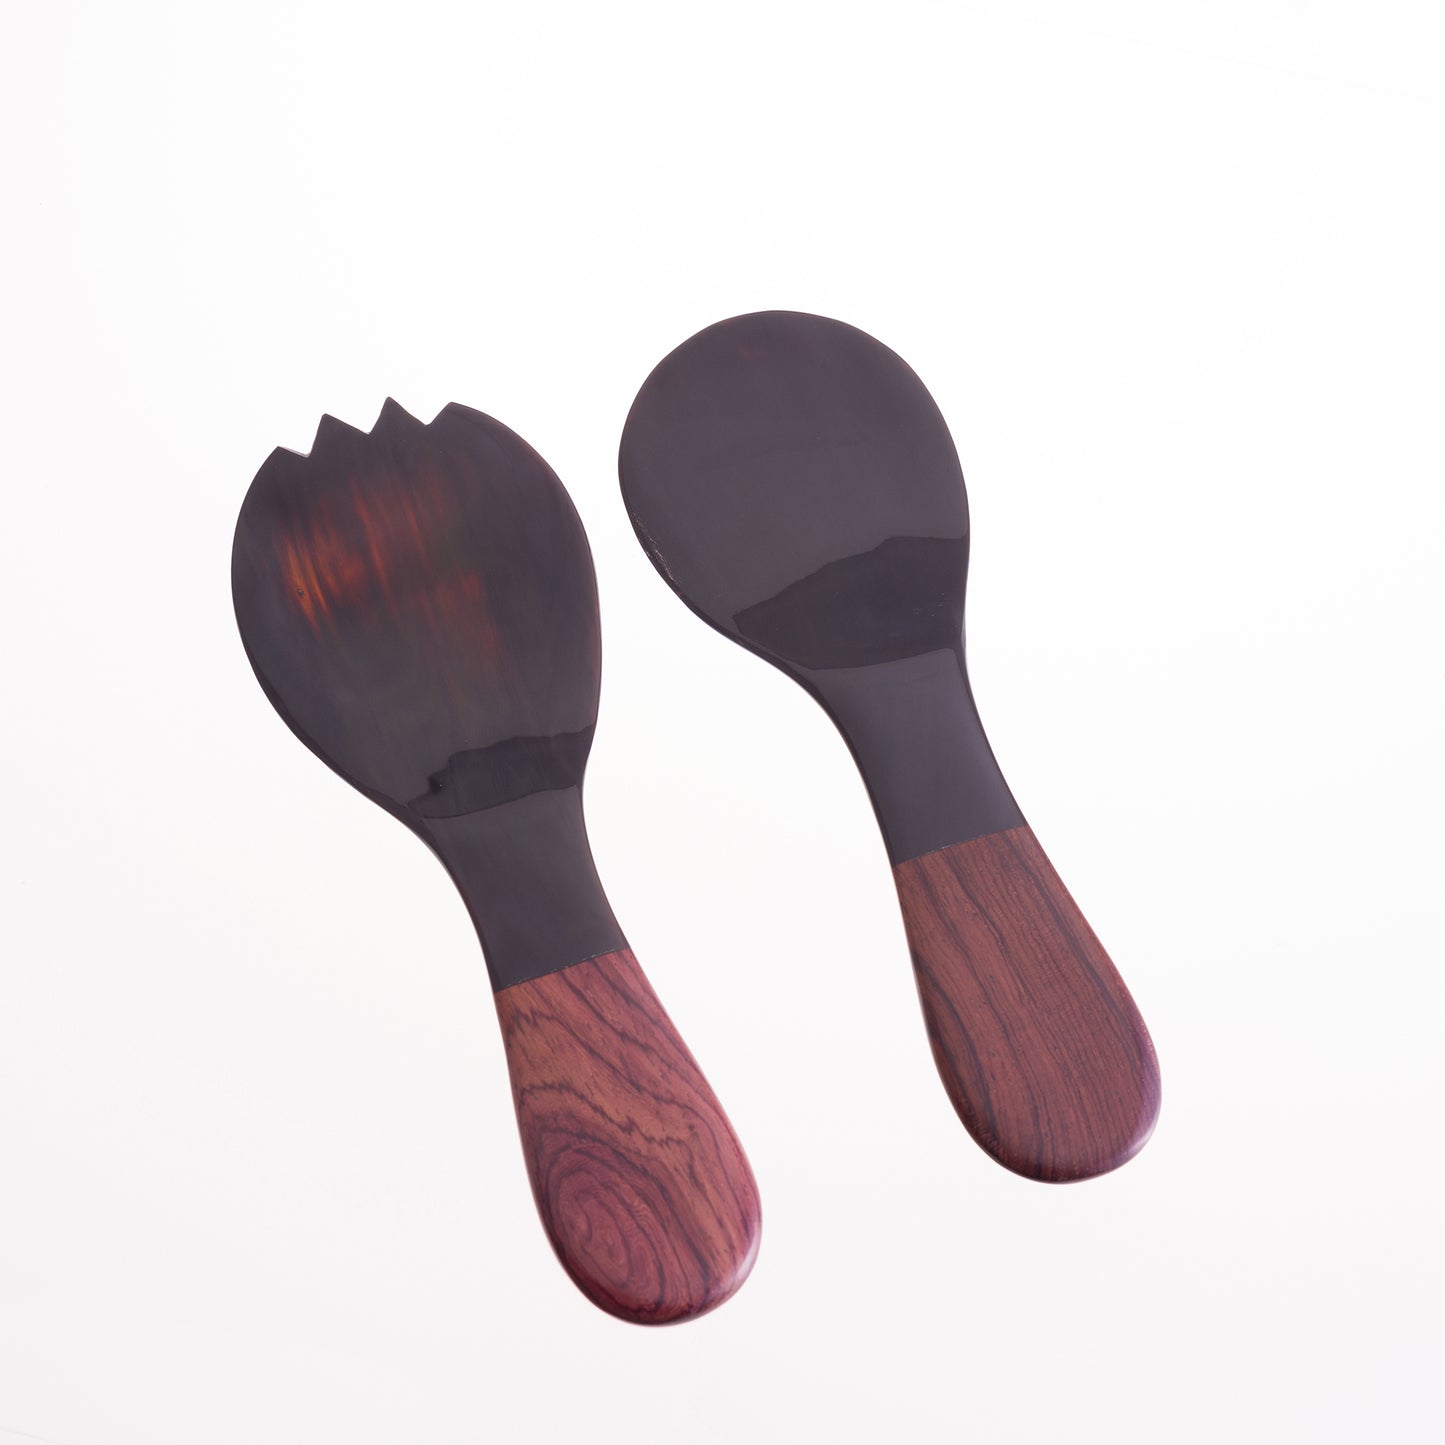 Short Salad Servers with Rosewood Handles